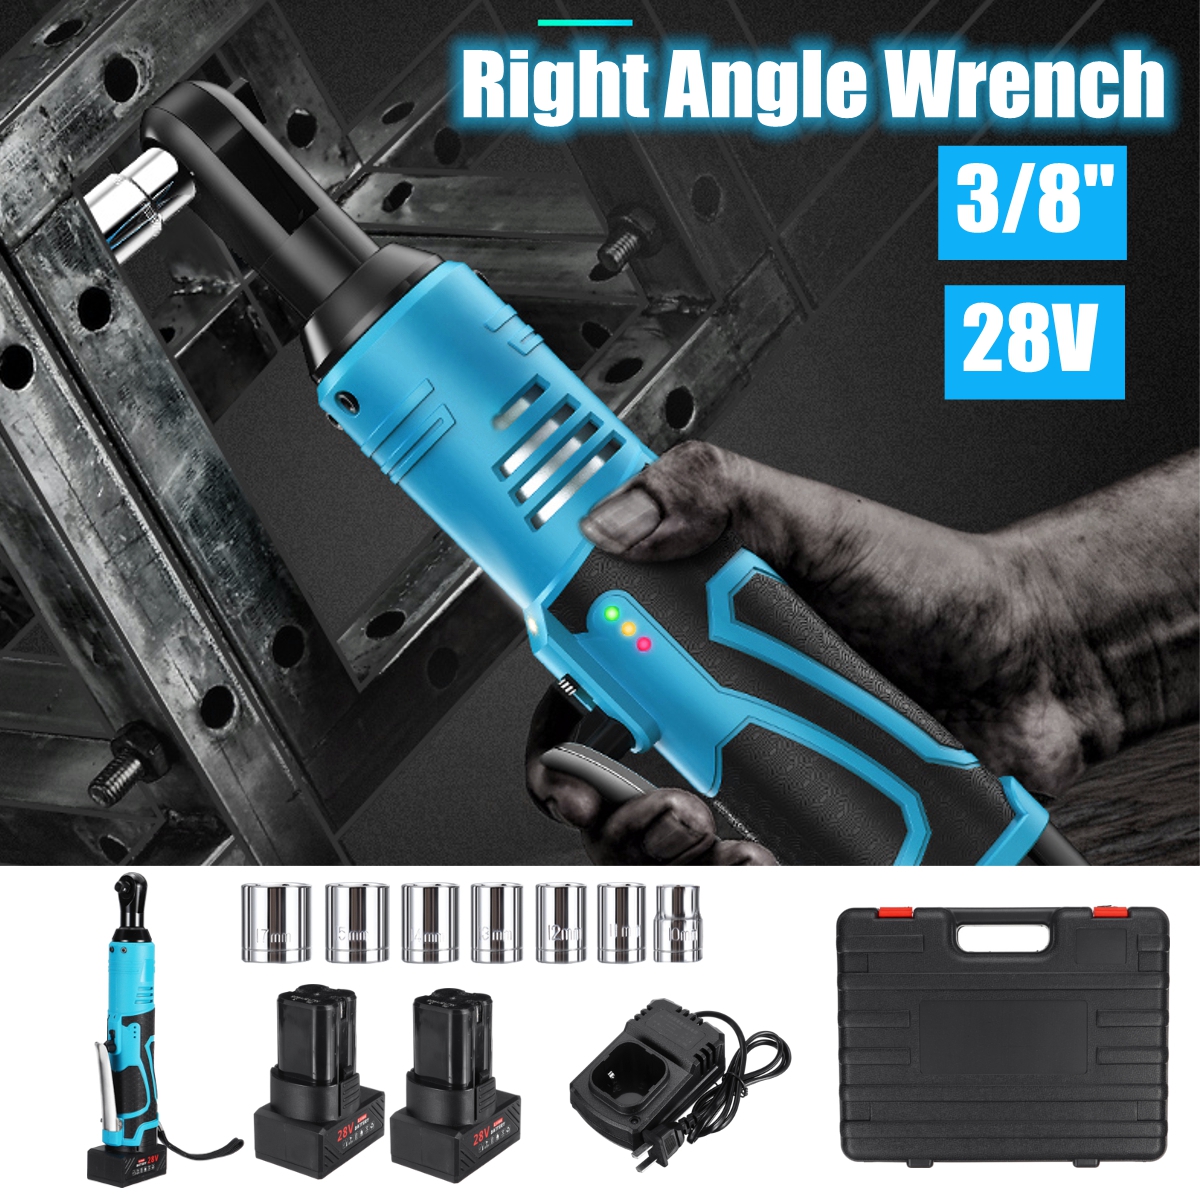 Portable-28V-Cordless-Rechargeable-Ratchet-Wrench-38-Inch-Electric-Right-Angle-Wrench-60Nm-W-2-Batte-1470794-1